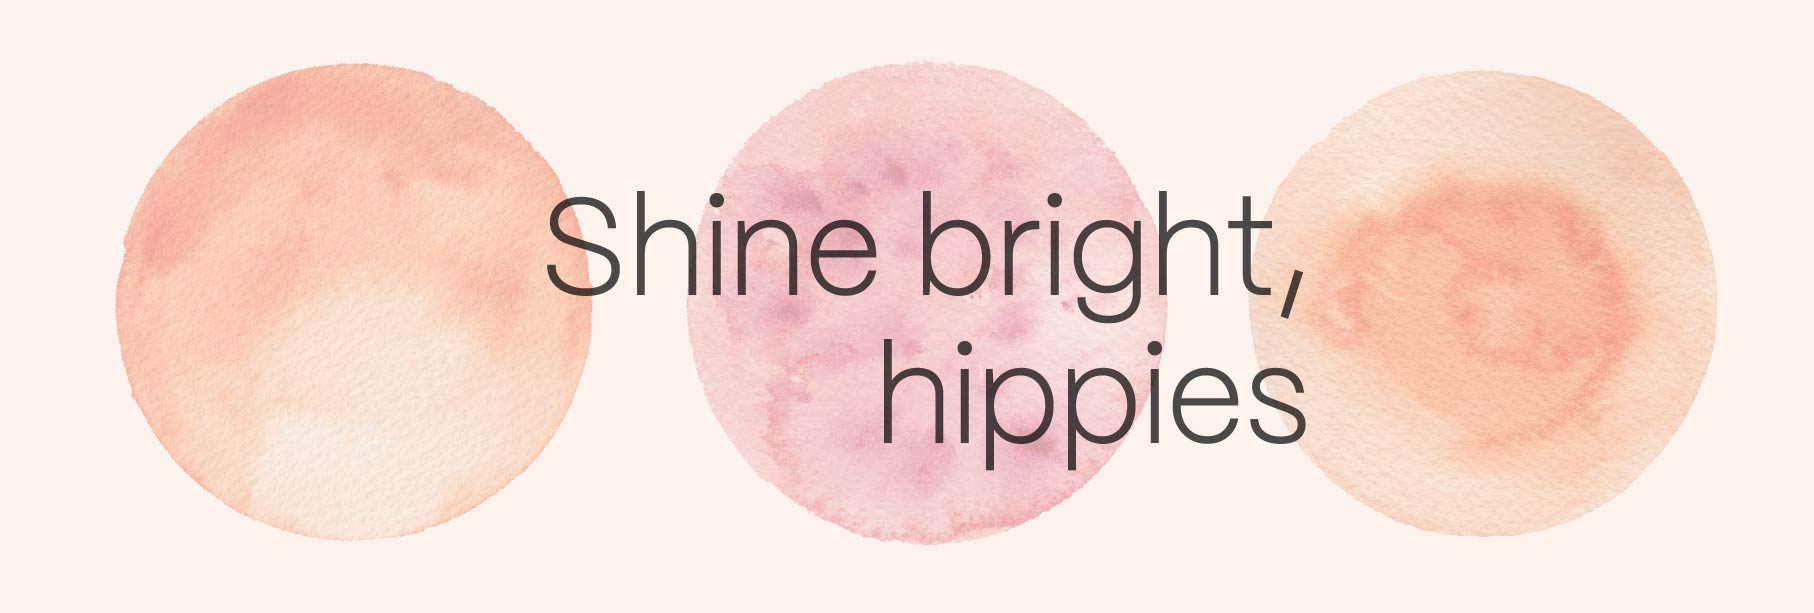 Shine bright, hippies.  Natural skin care tips